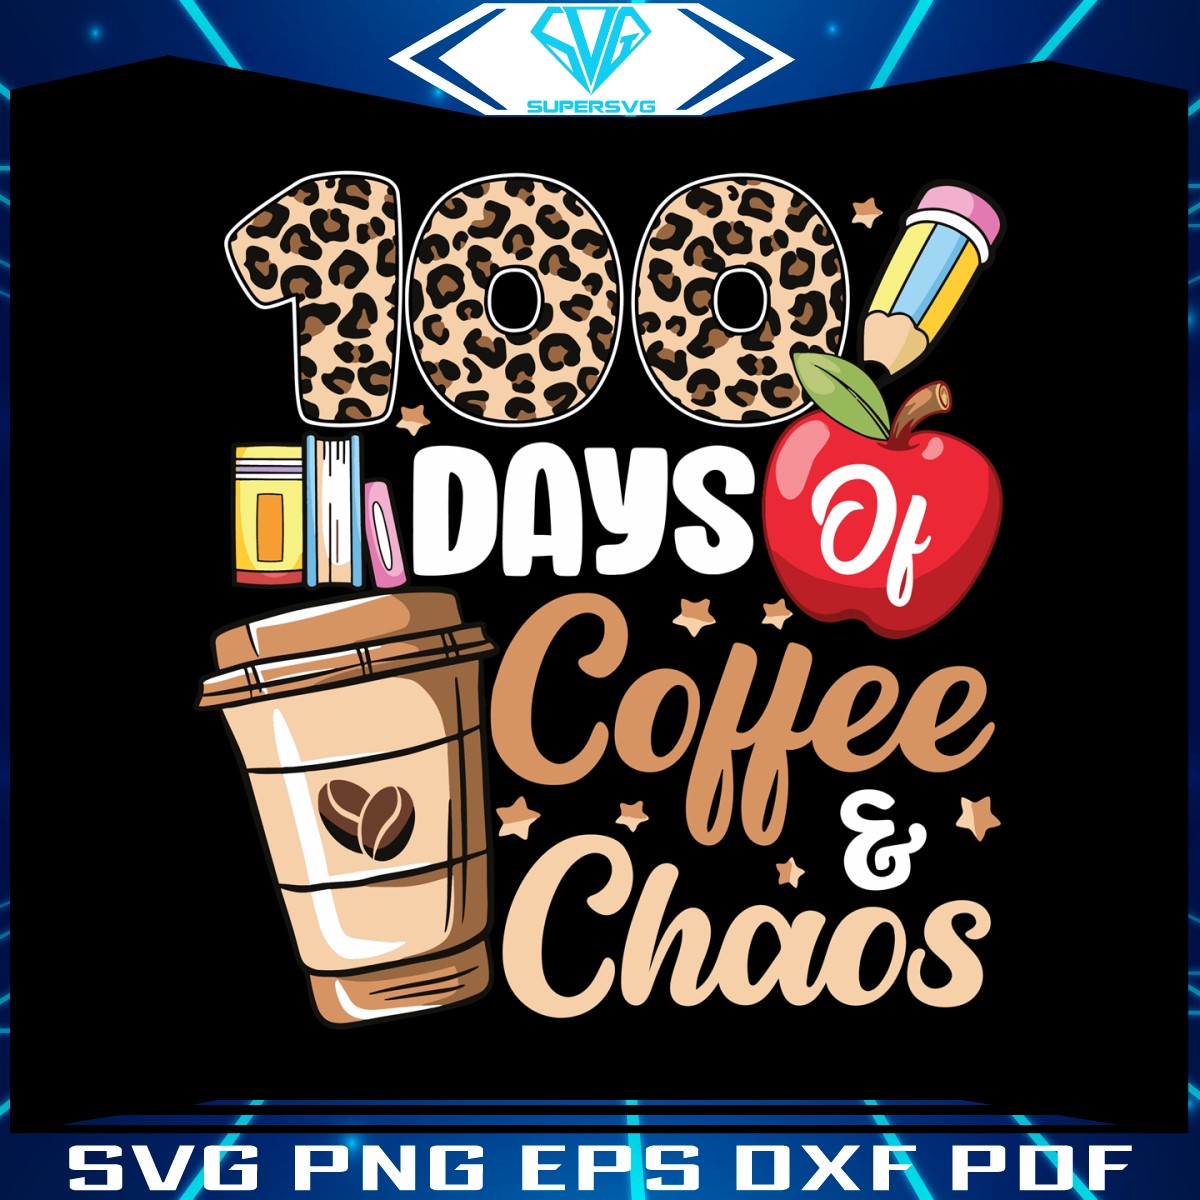 retro-100-days-of-coffee-and-chaos-svg